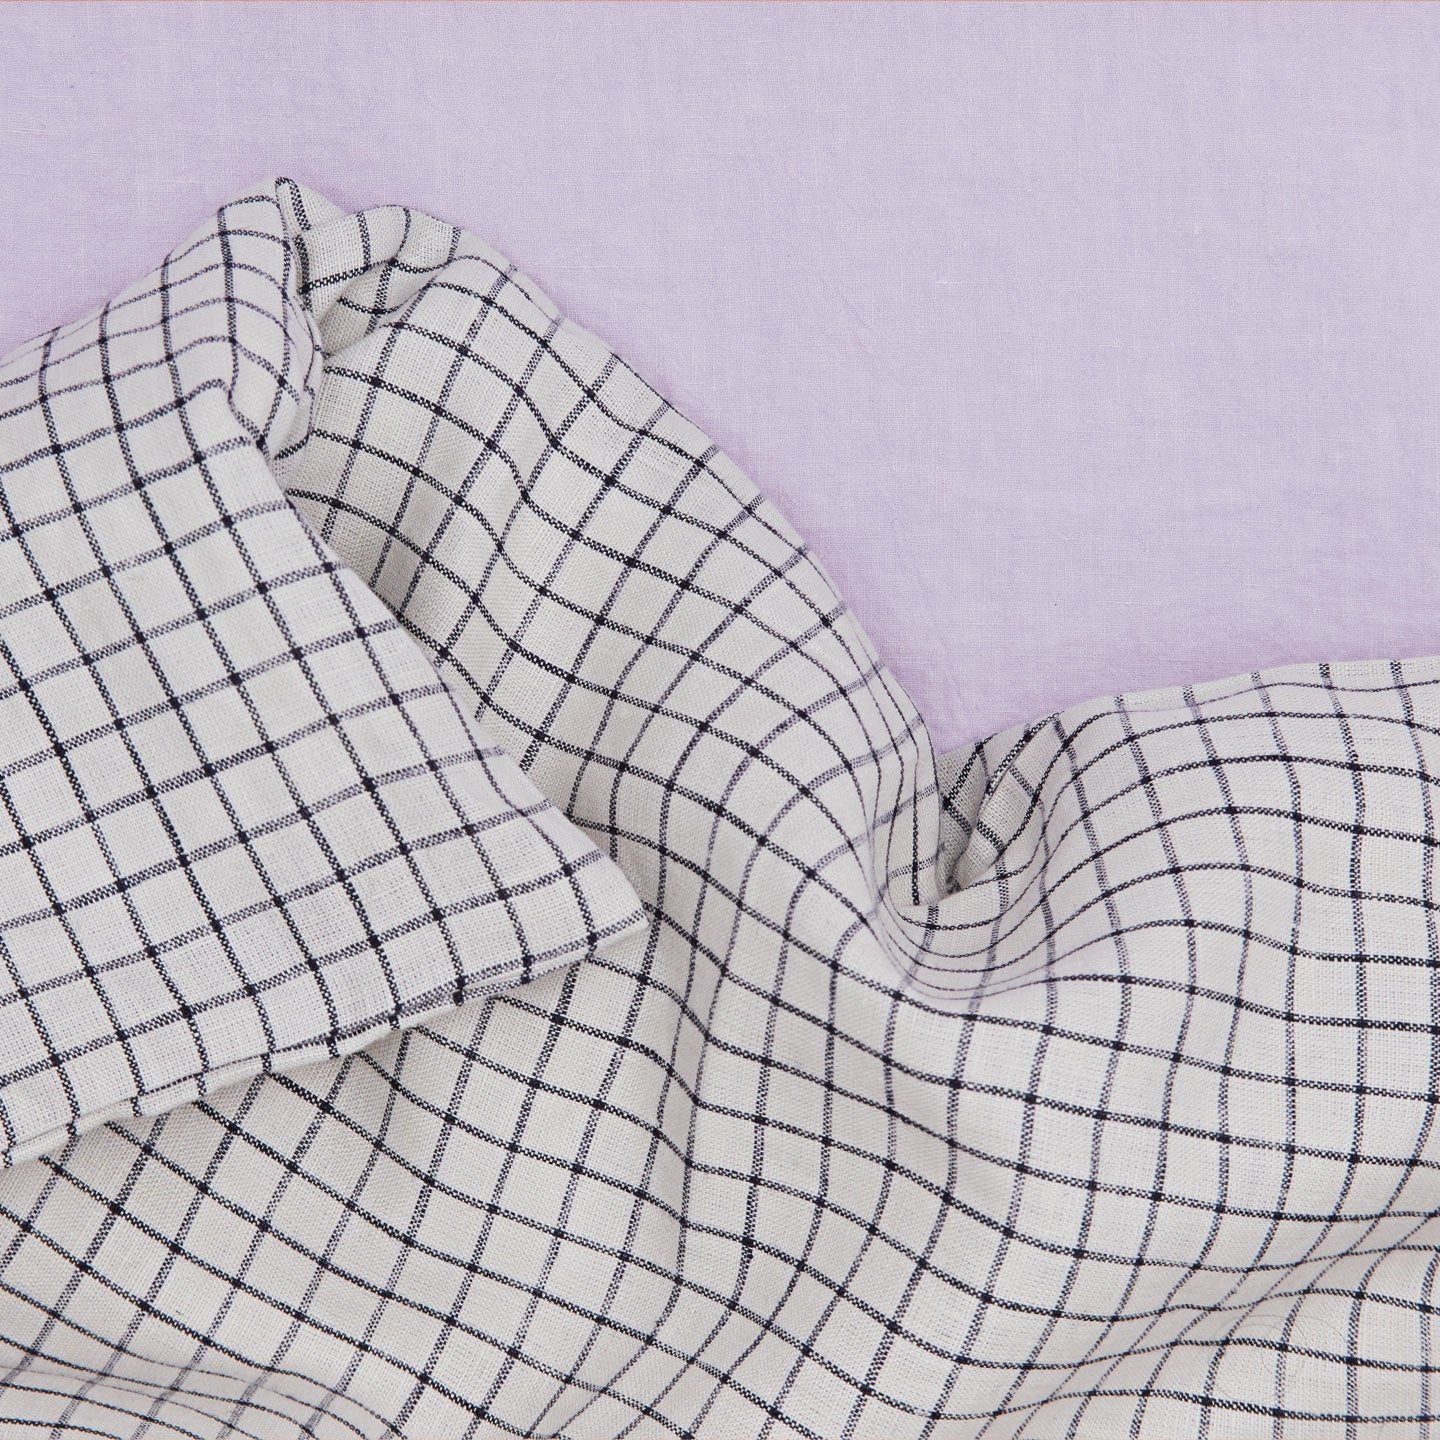 A close up of a checked linen duvet cover on a lilac sheet.